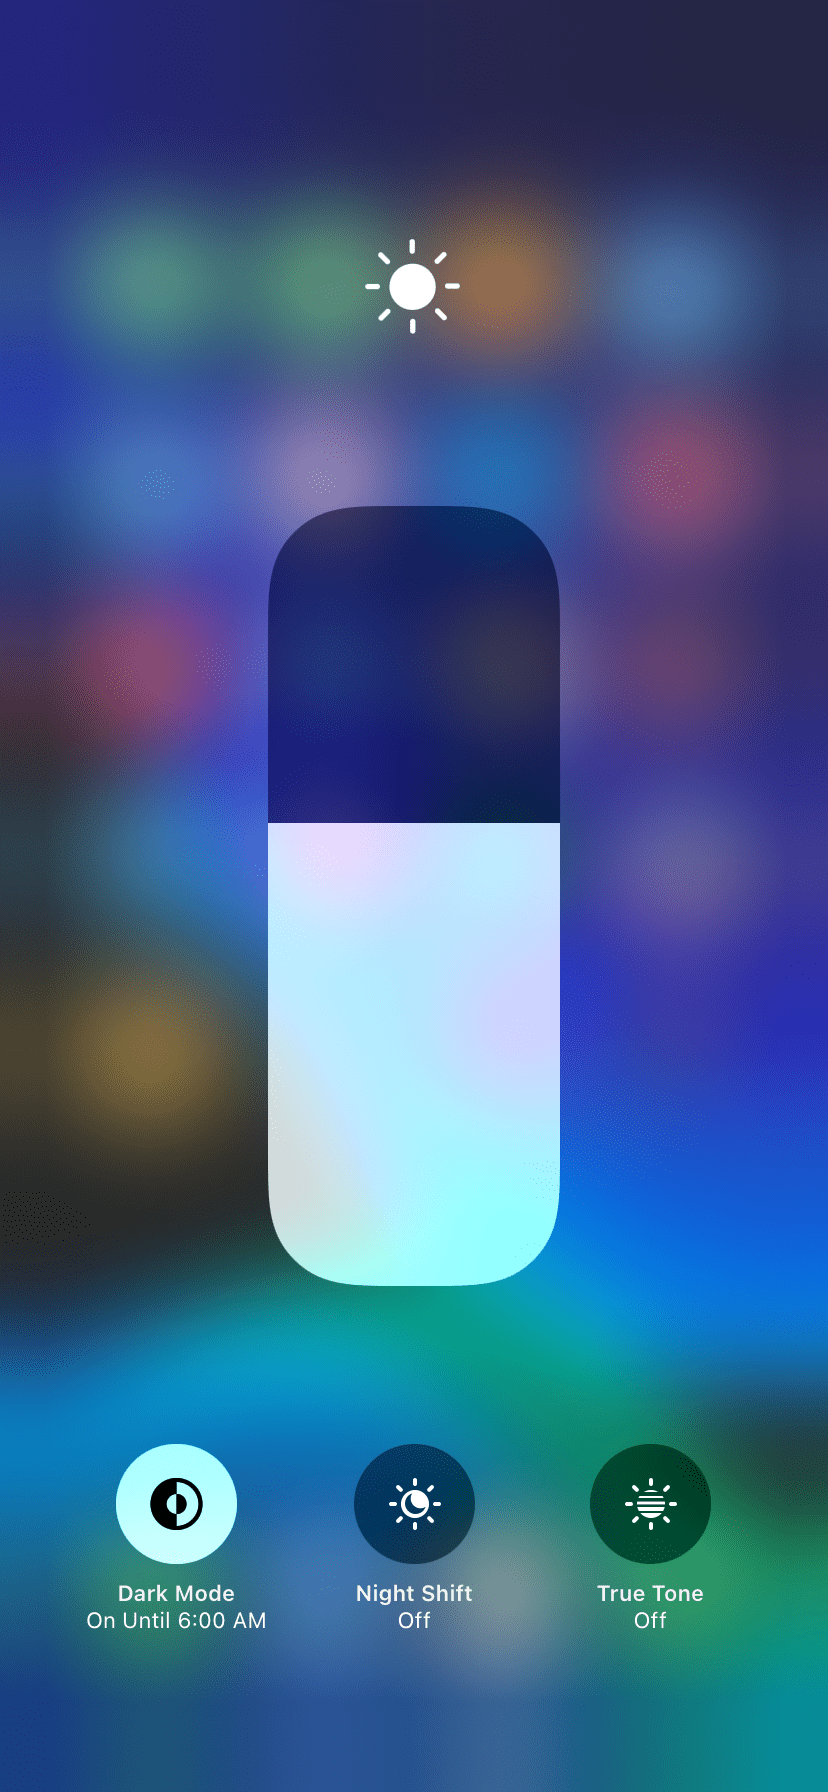 Expanded Control Center Brightness Slider on iPhone